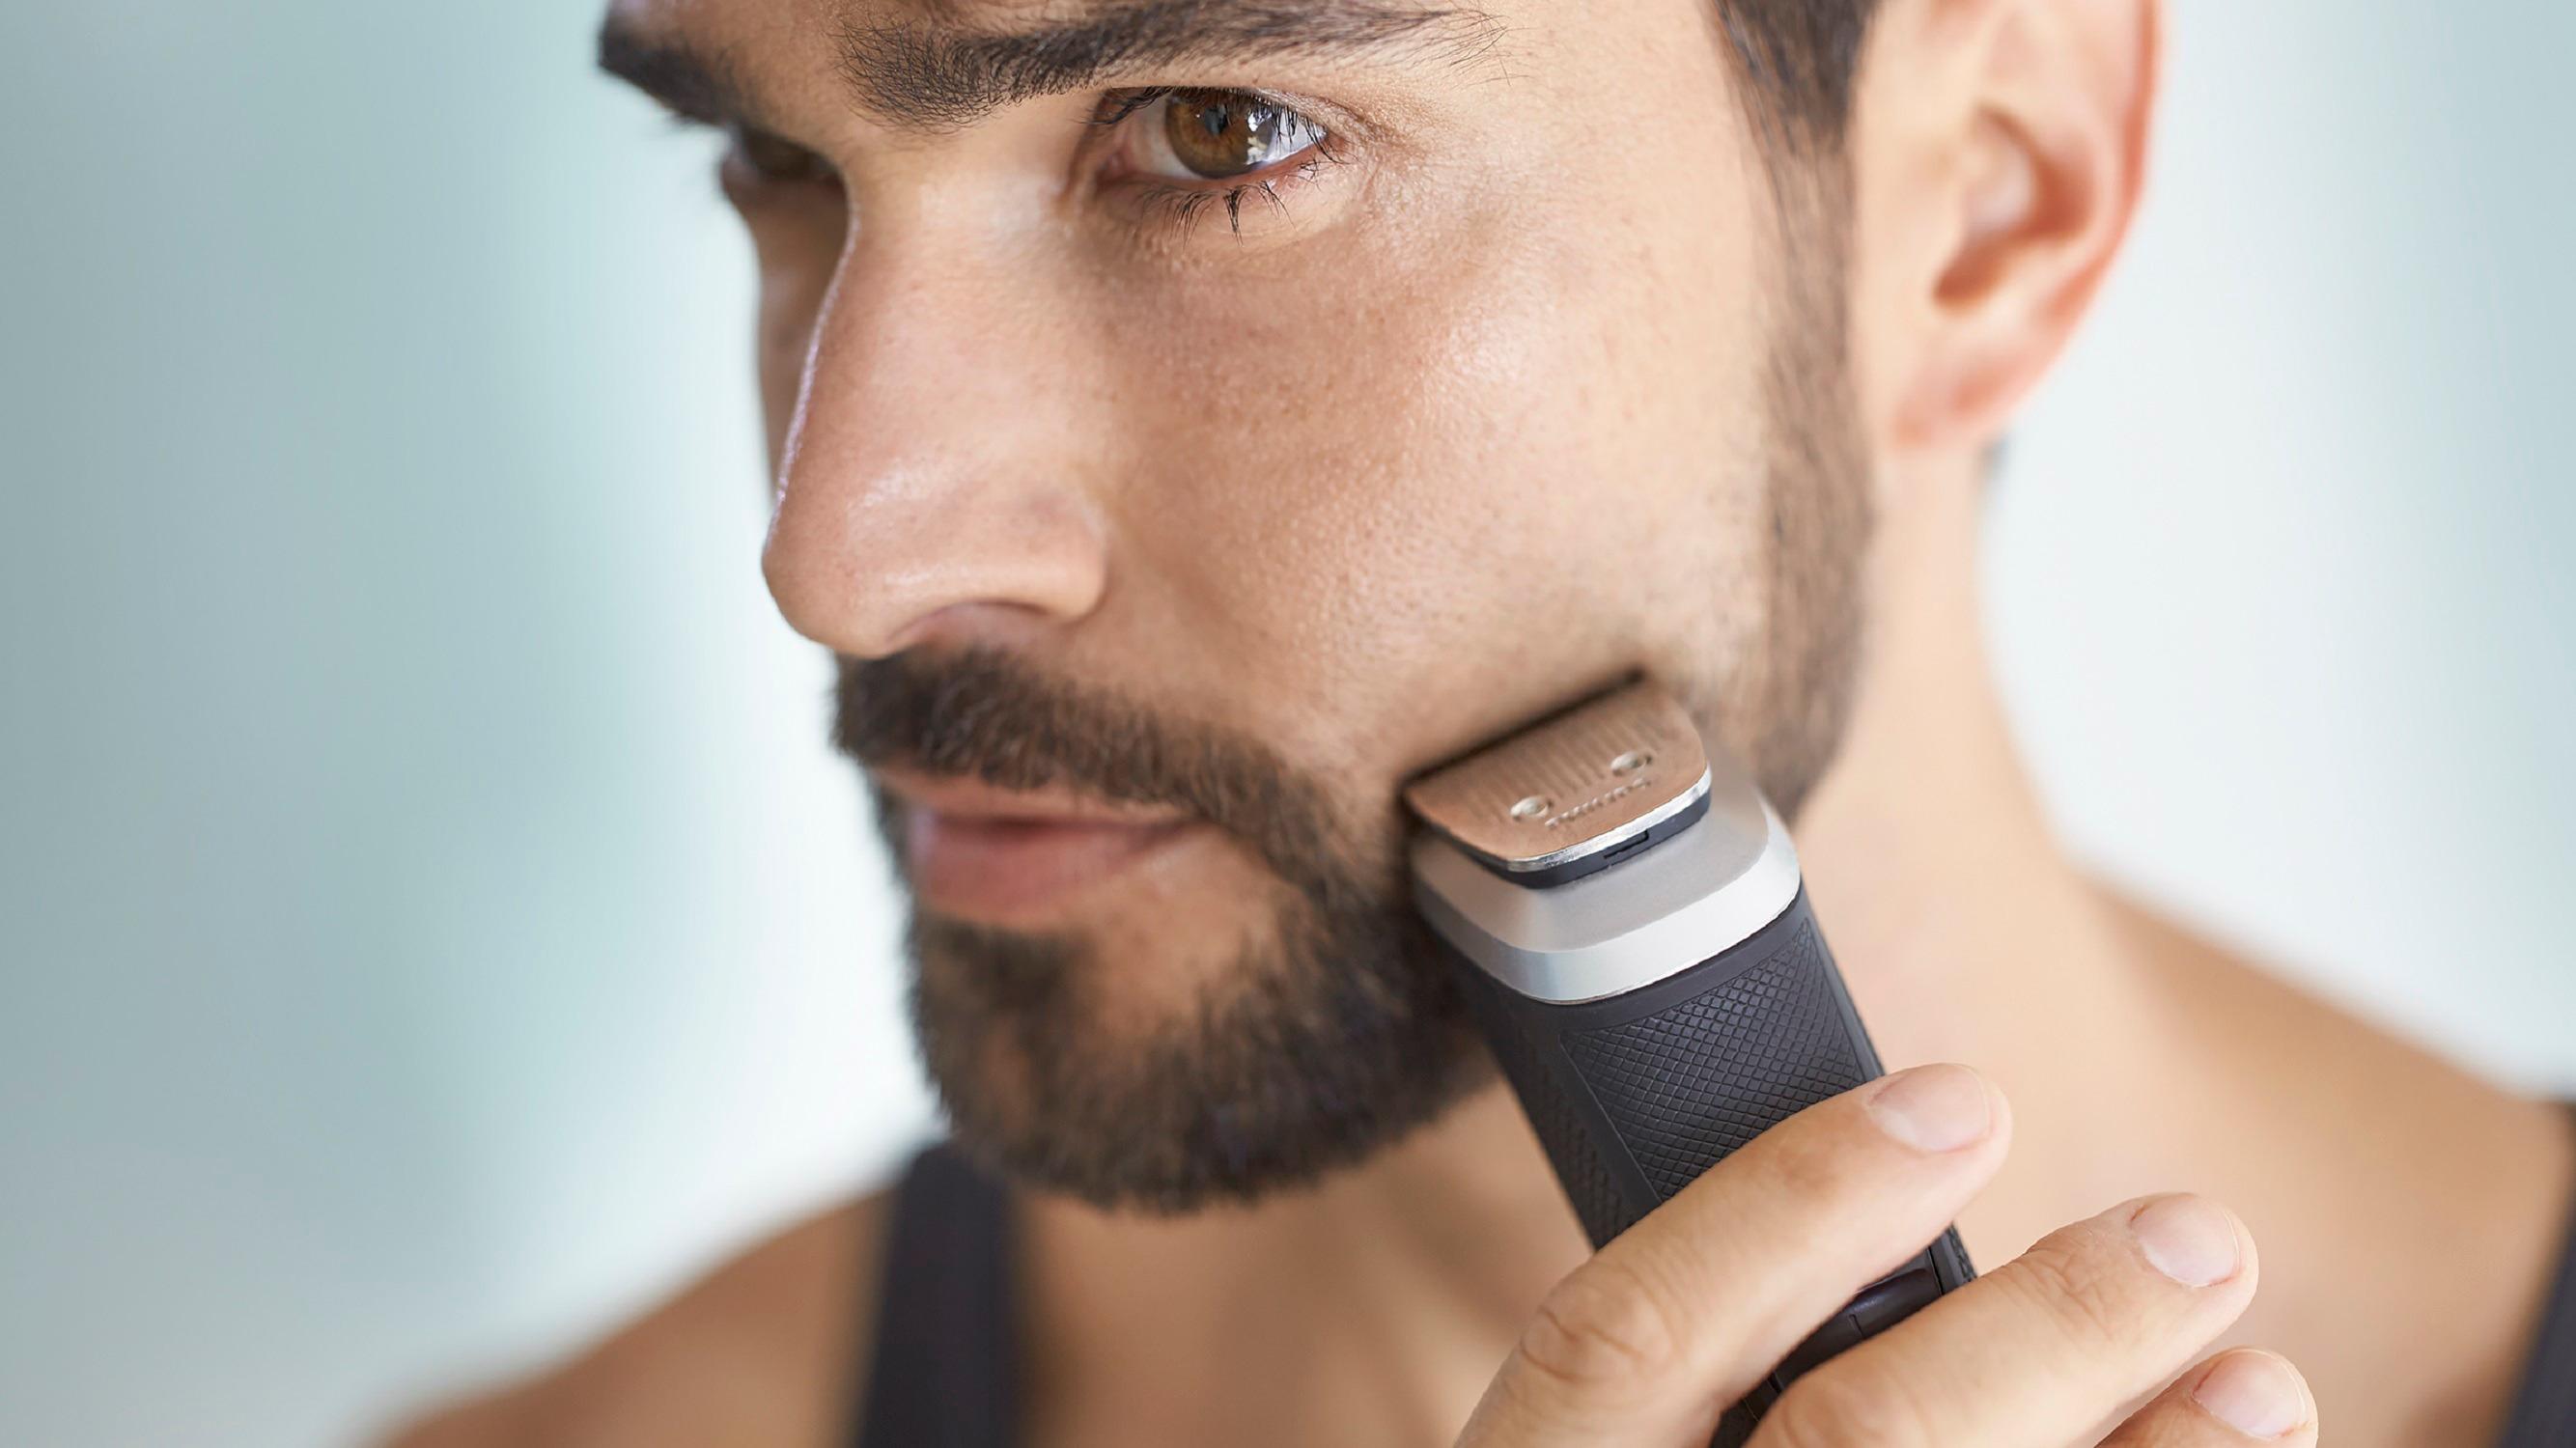 philips series 5000 beard trimmer review